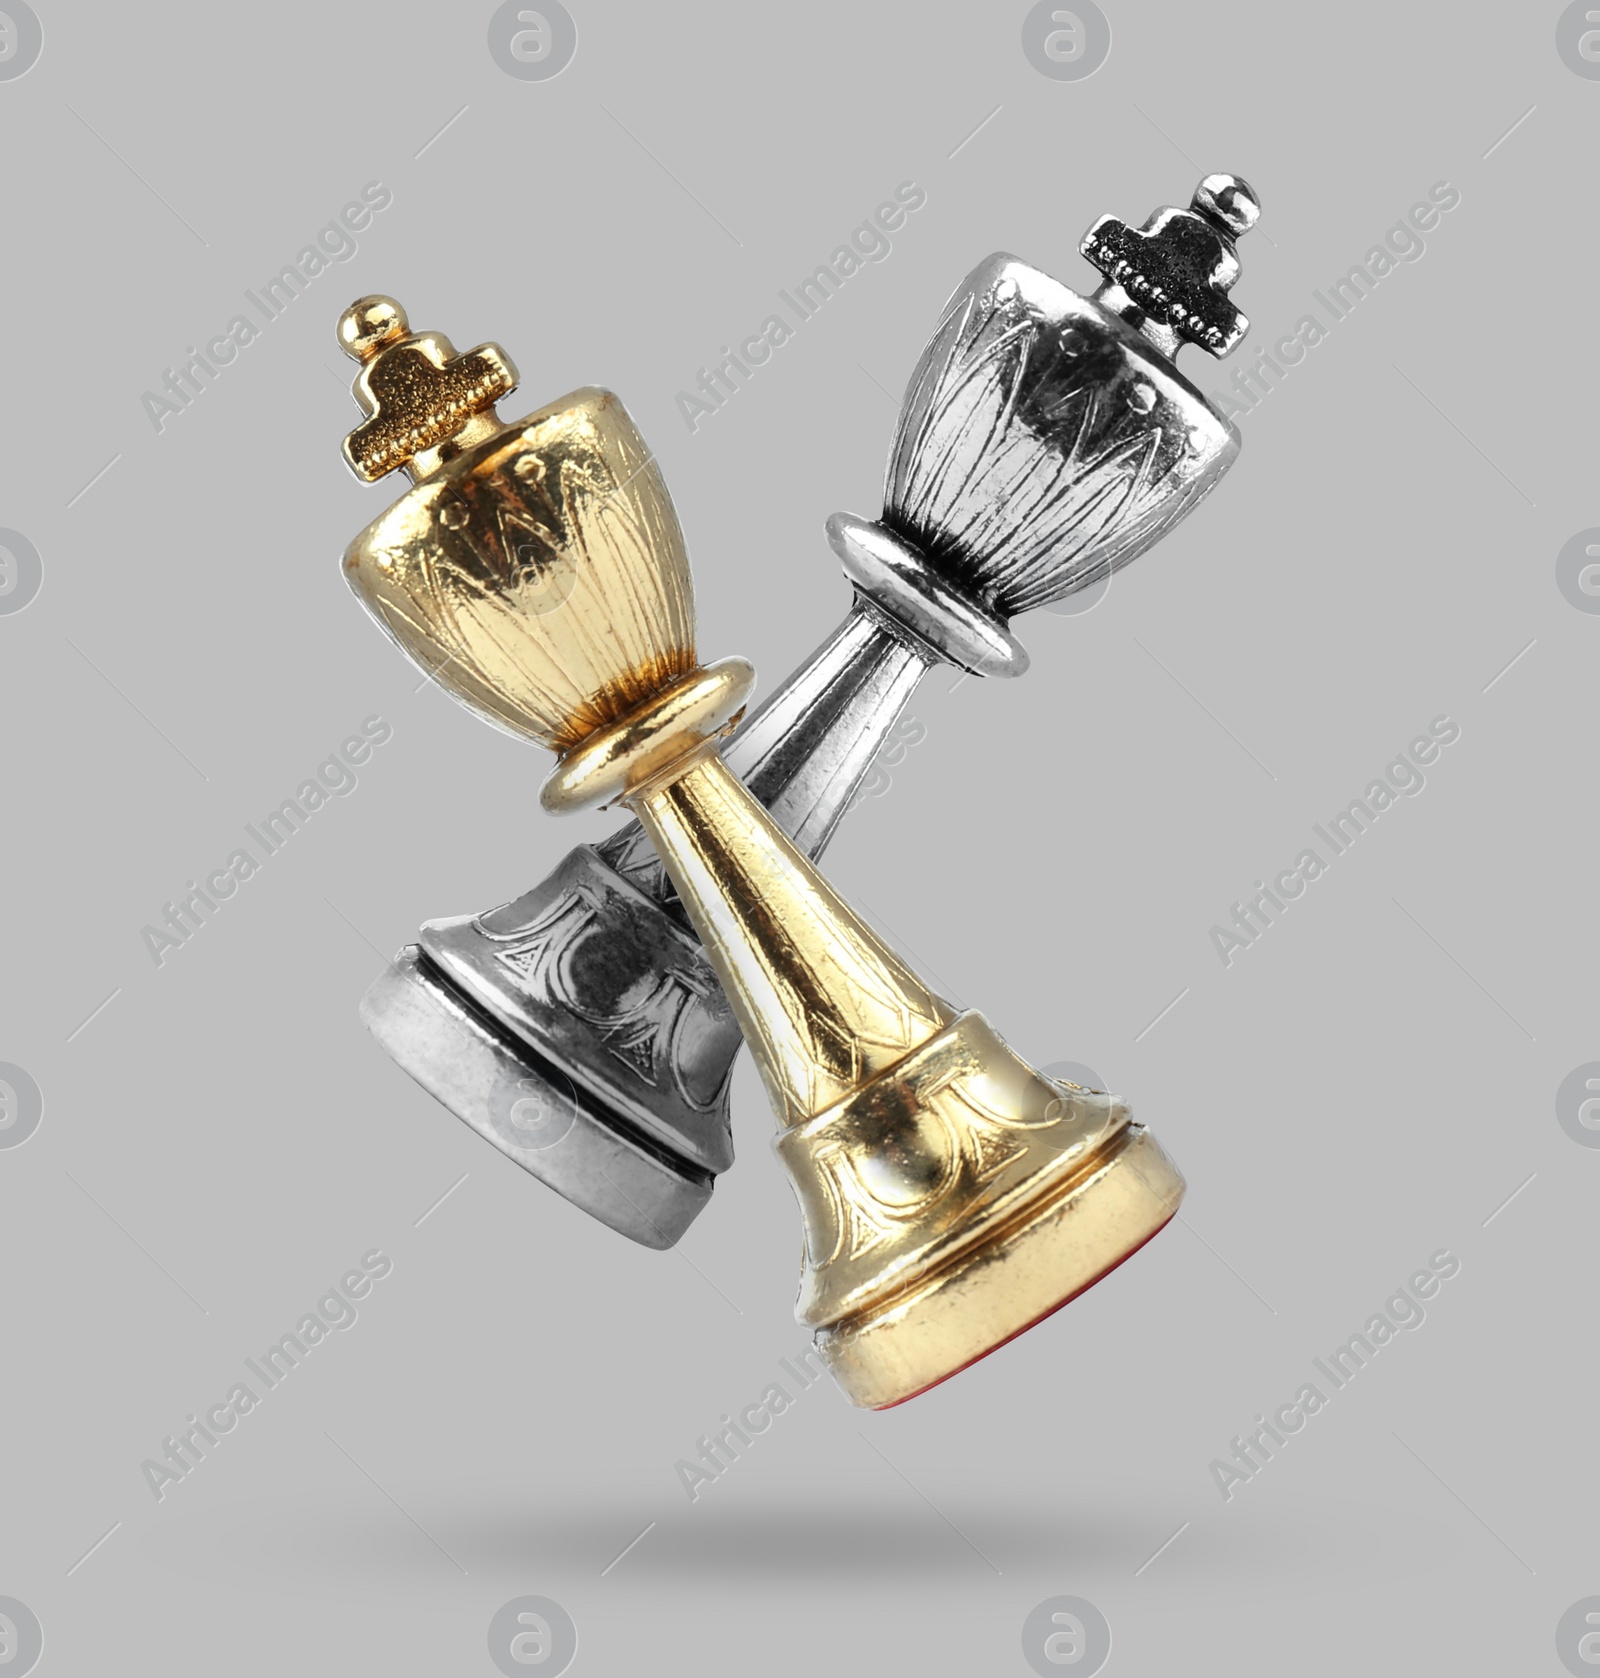 Image of Golden and silver chess kings in air on grey background